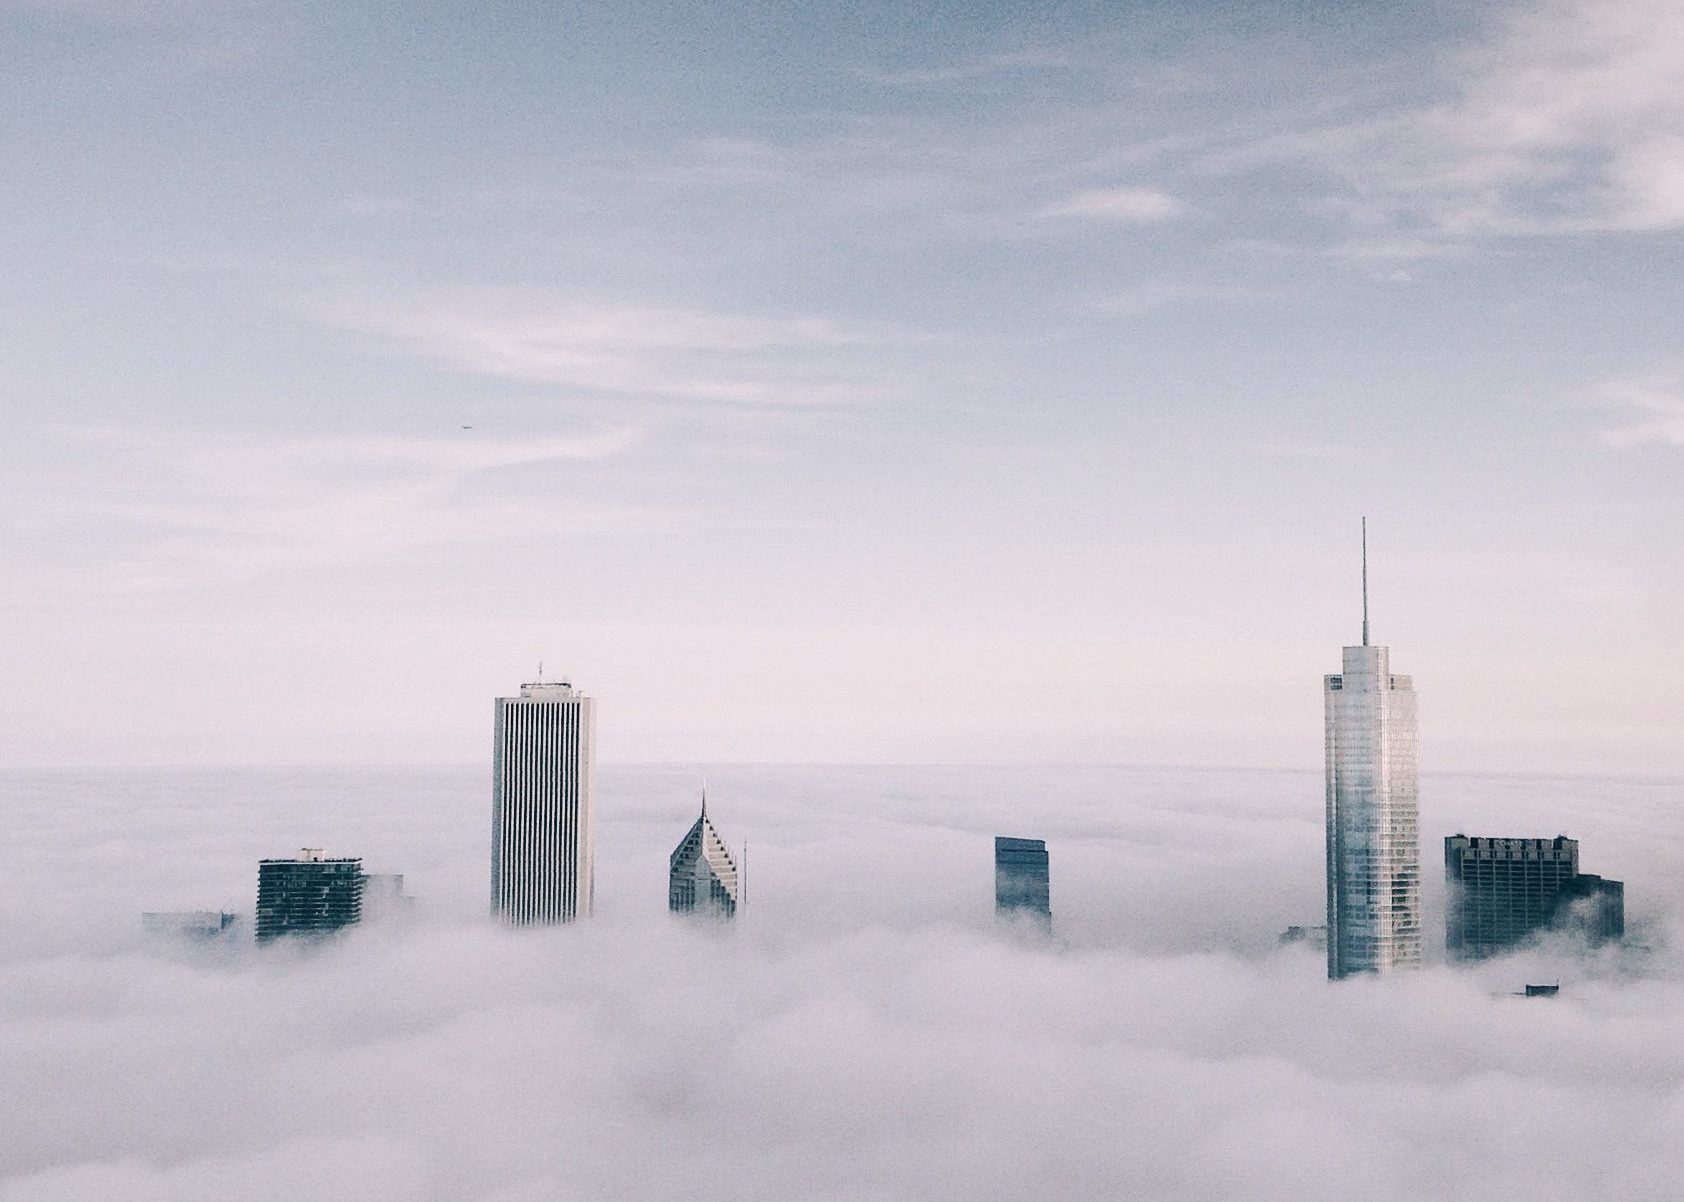 An image of the Chicago skyline with fog and clouds